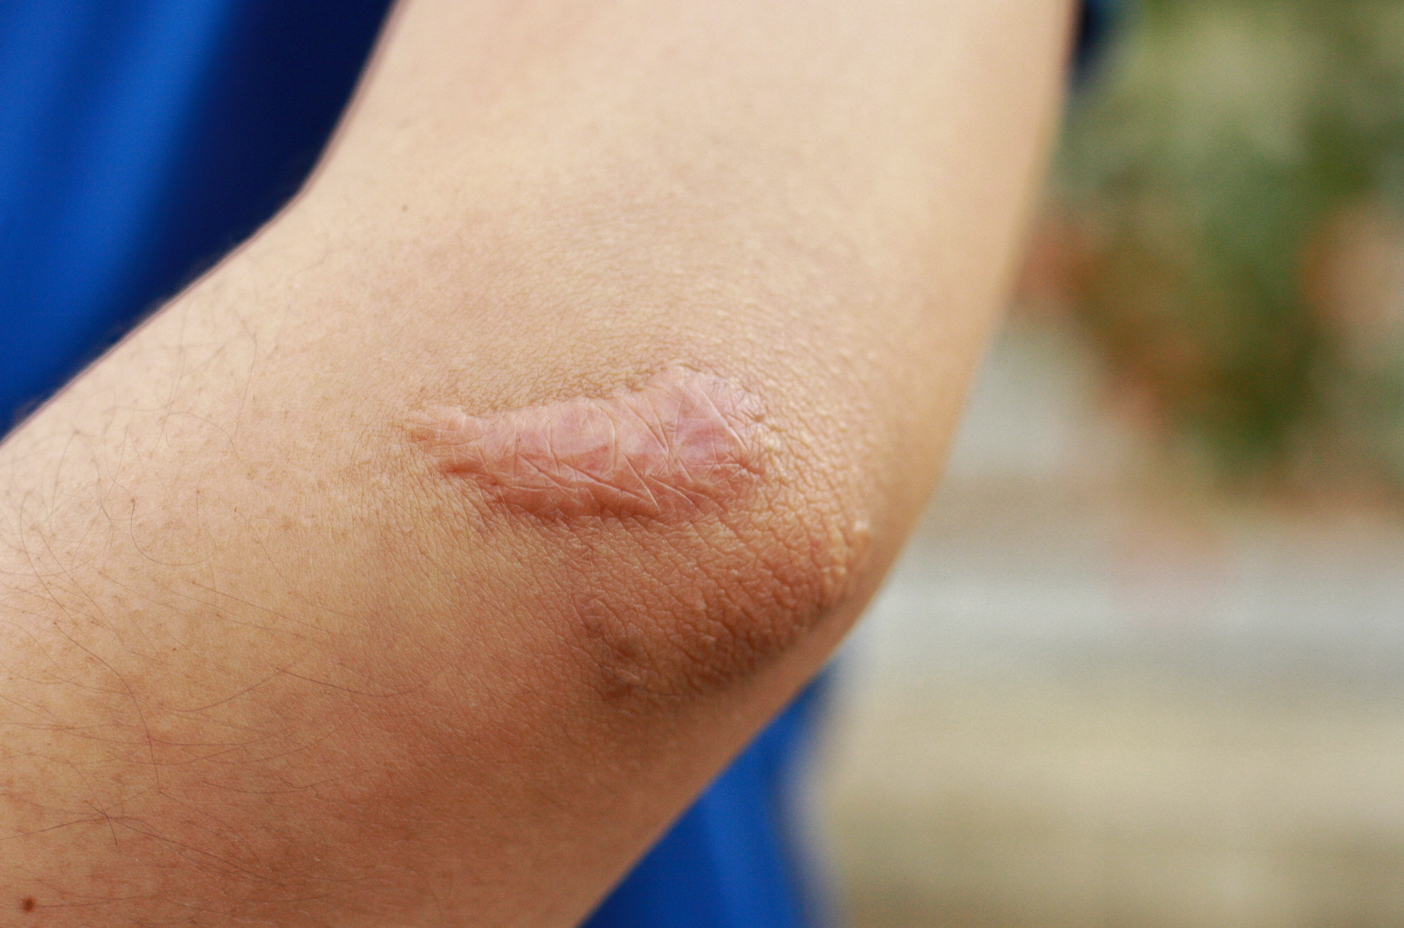 Why Do Some People Scar More Than Others? || what causes scarring, what skin types scar easily, how to prevent scarring